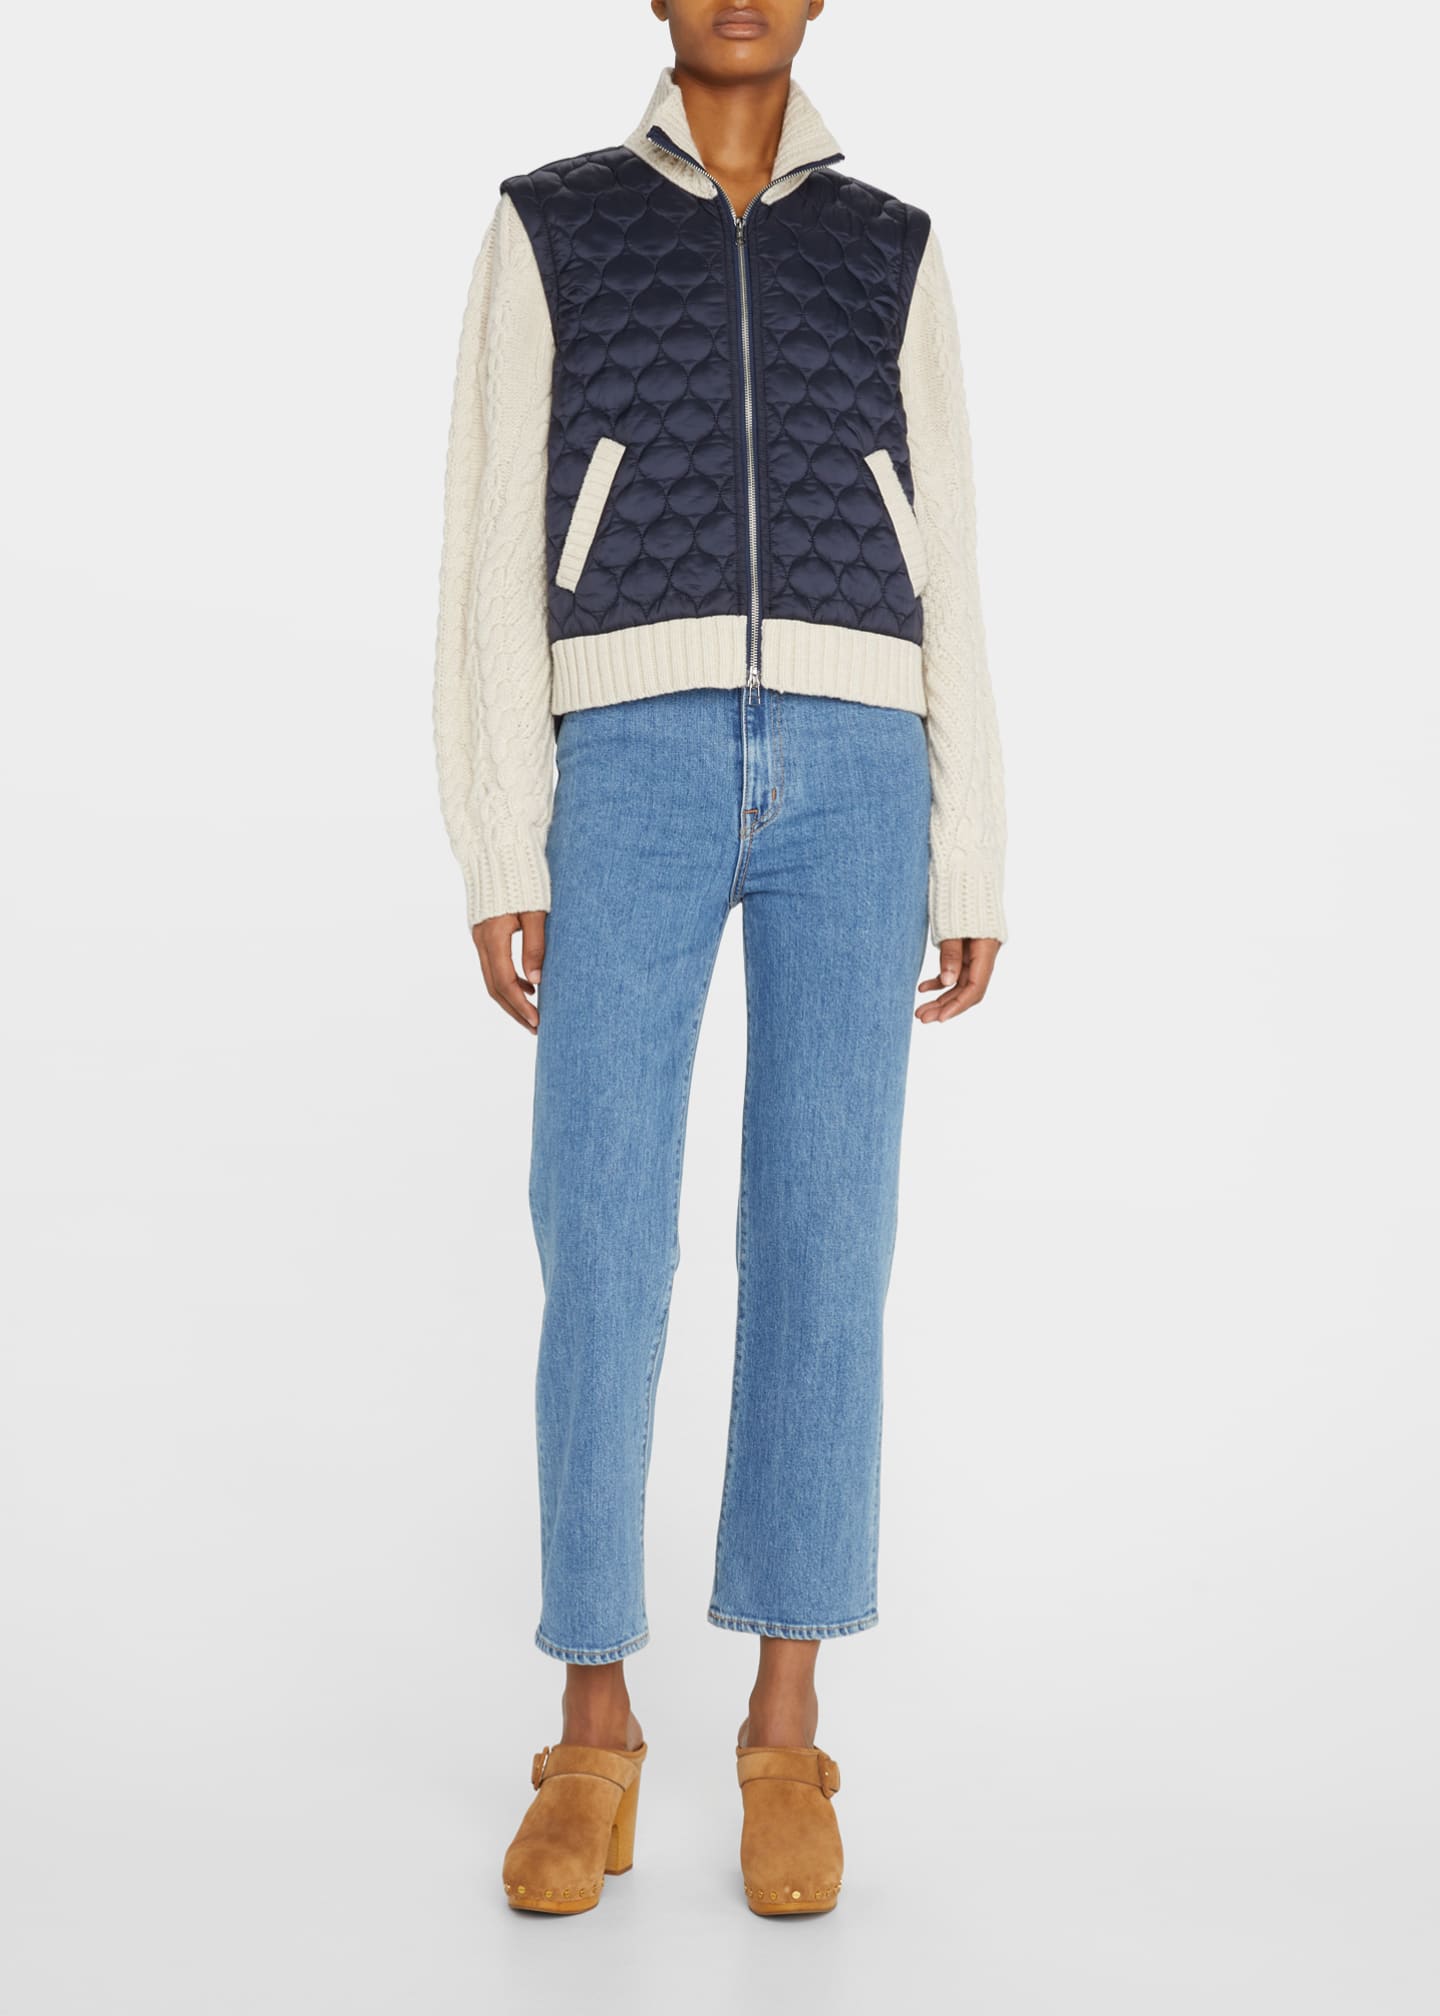 Veronica Beard Patra Mixed-Media Quilted Cable-Knit Jacket - Bergdorf ...